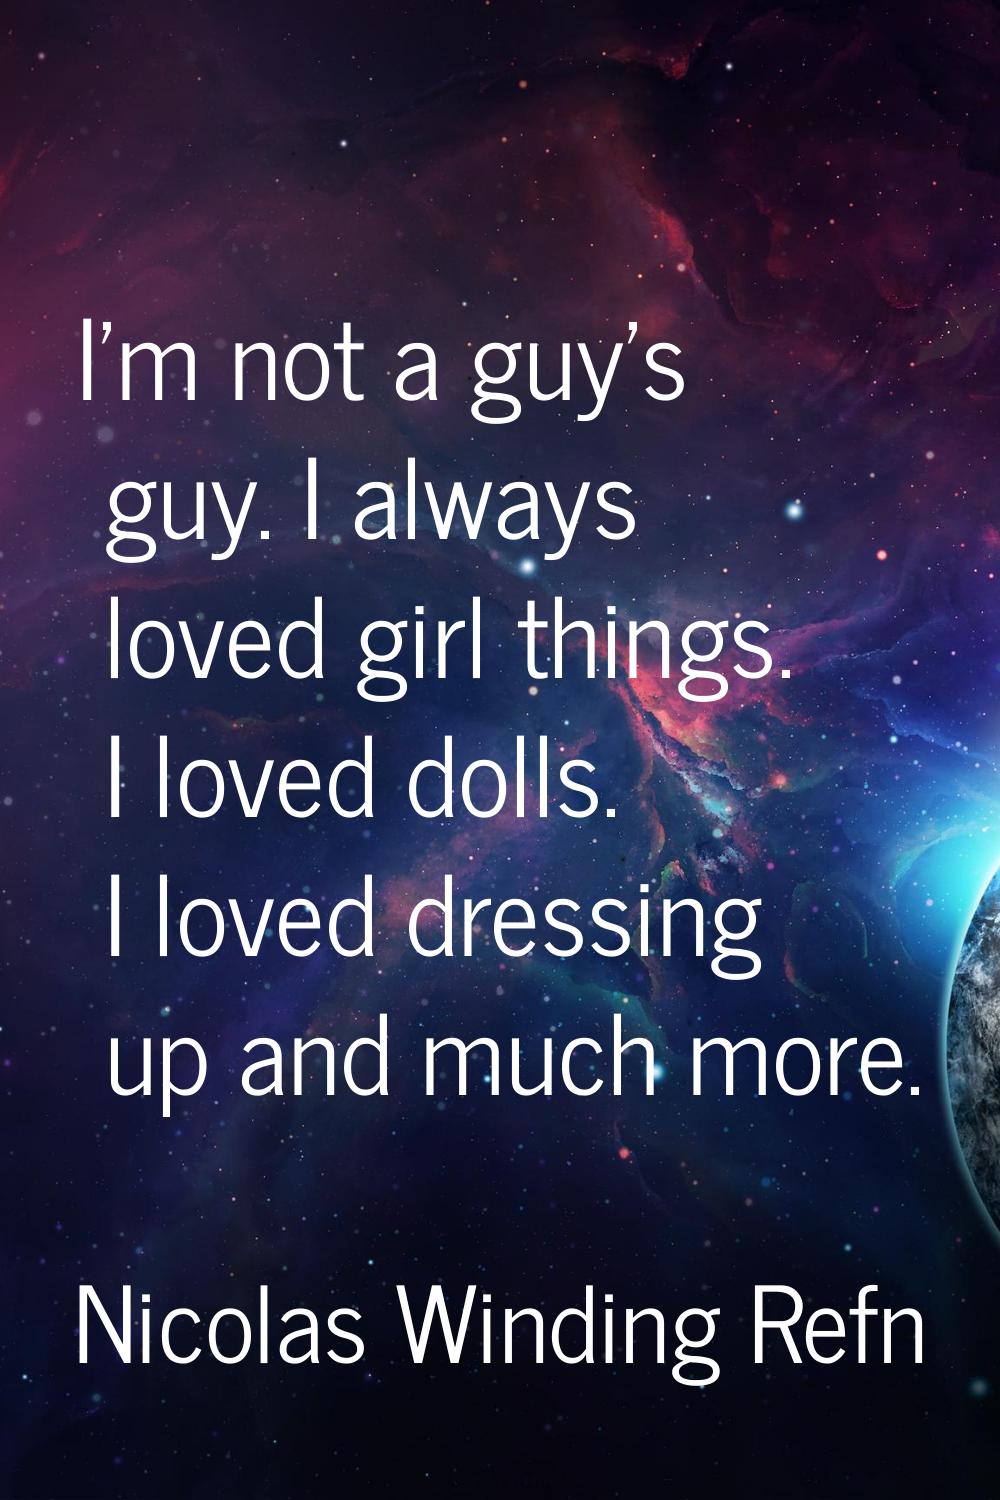 I'm not a guy's guy. I always loved girl things. I loved dolls. I loved dressing up and much more.